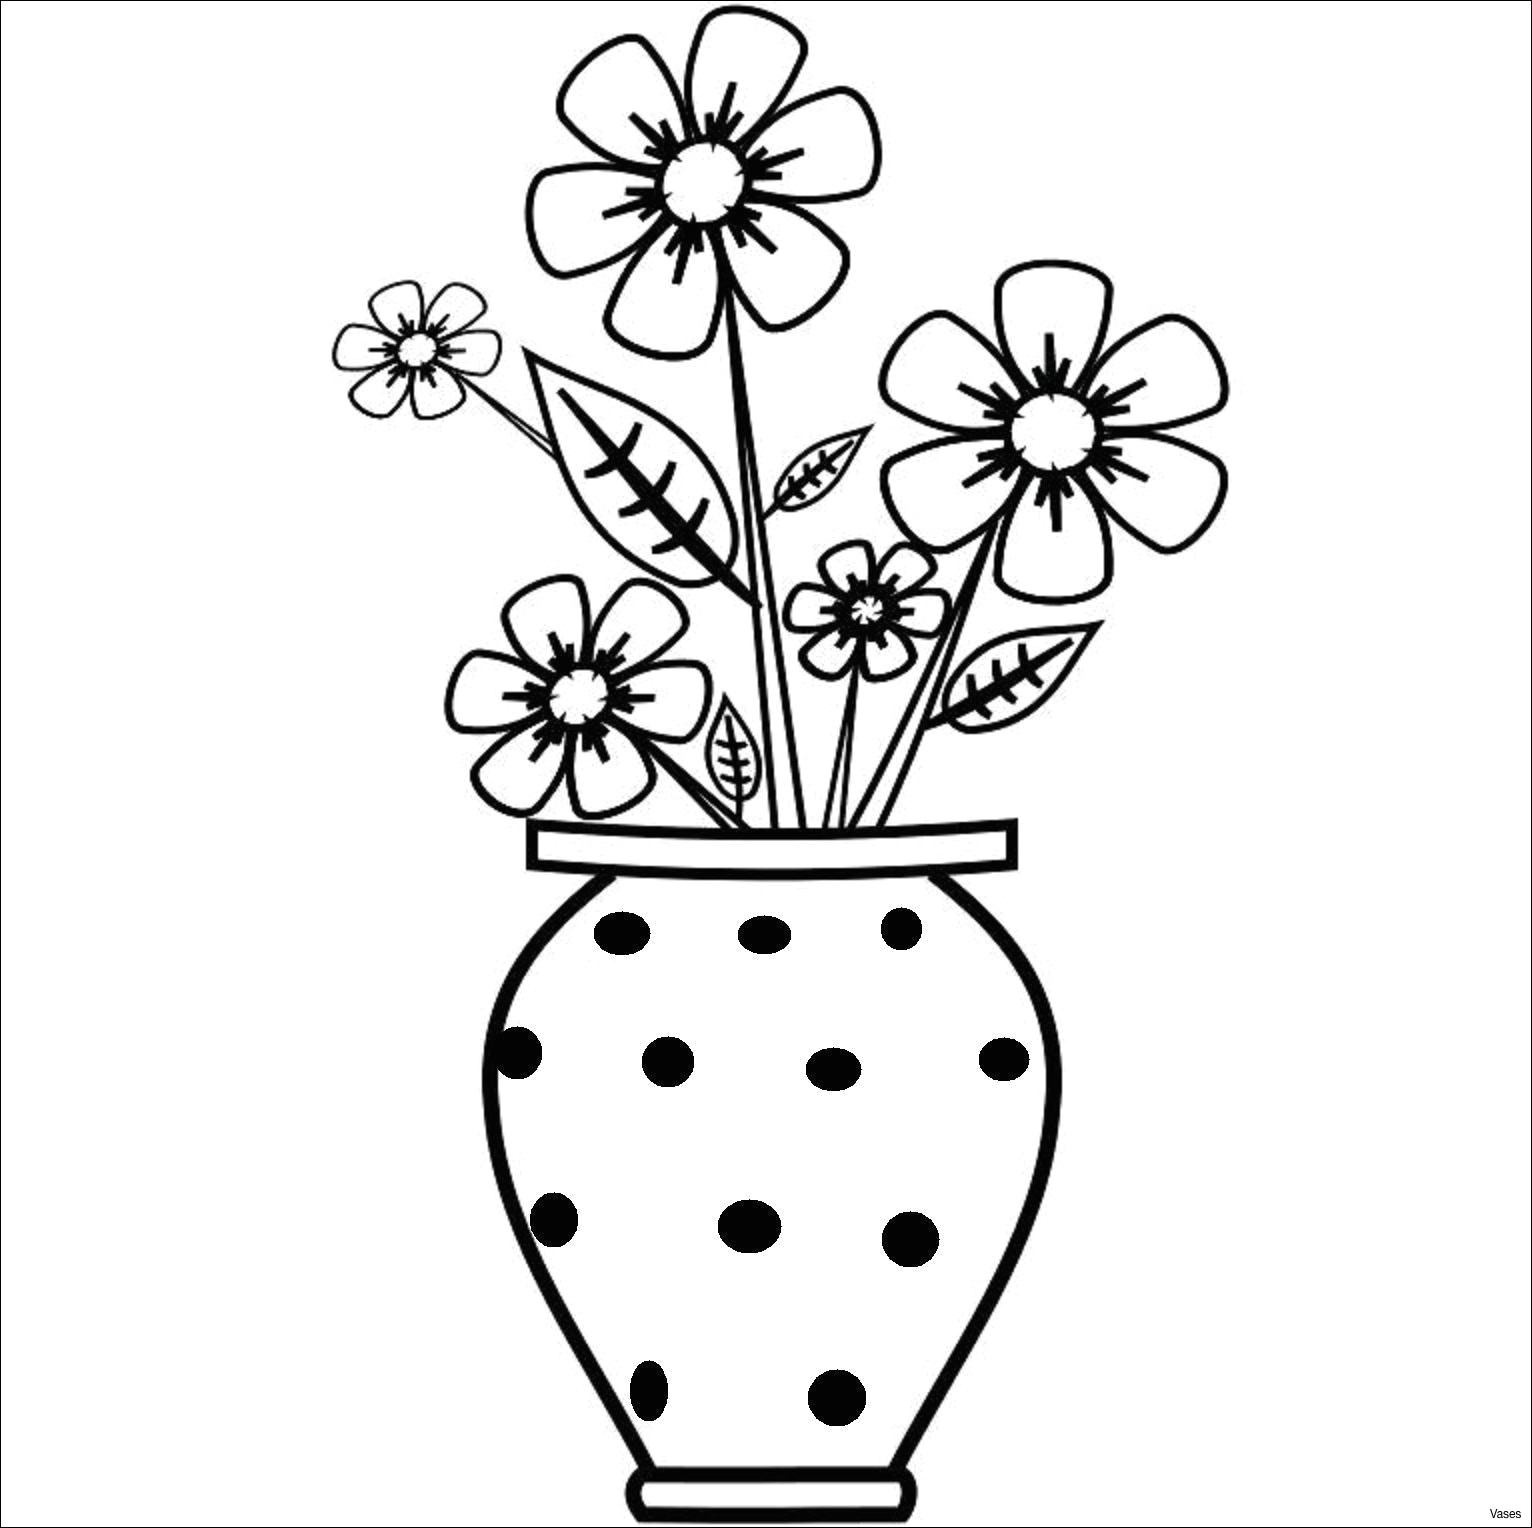 Easy Drawings with Markers Images Of Easy Drawings Vase Art Drawings How to Draw A Vase Step 2h